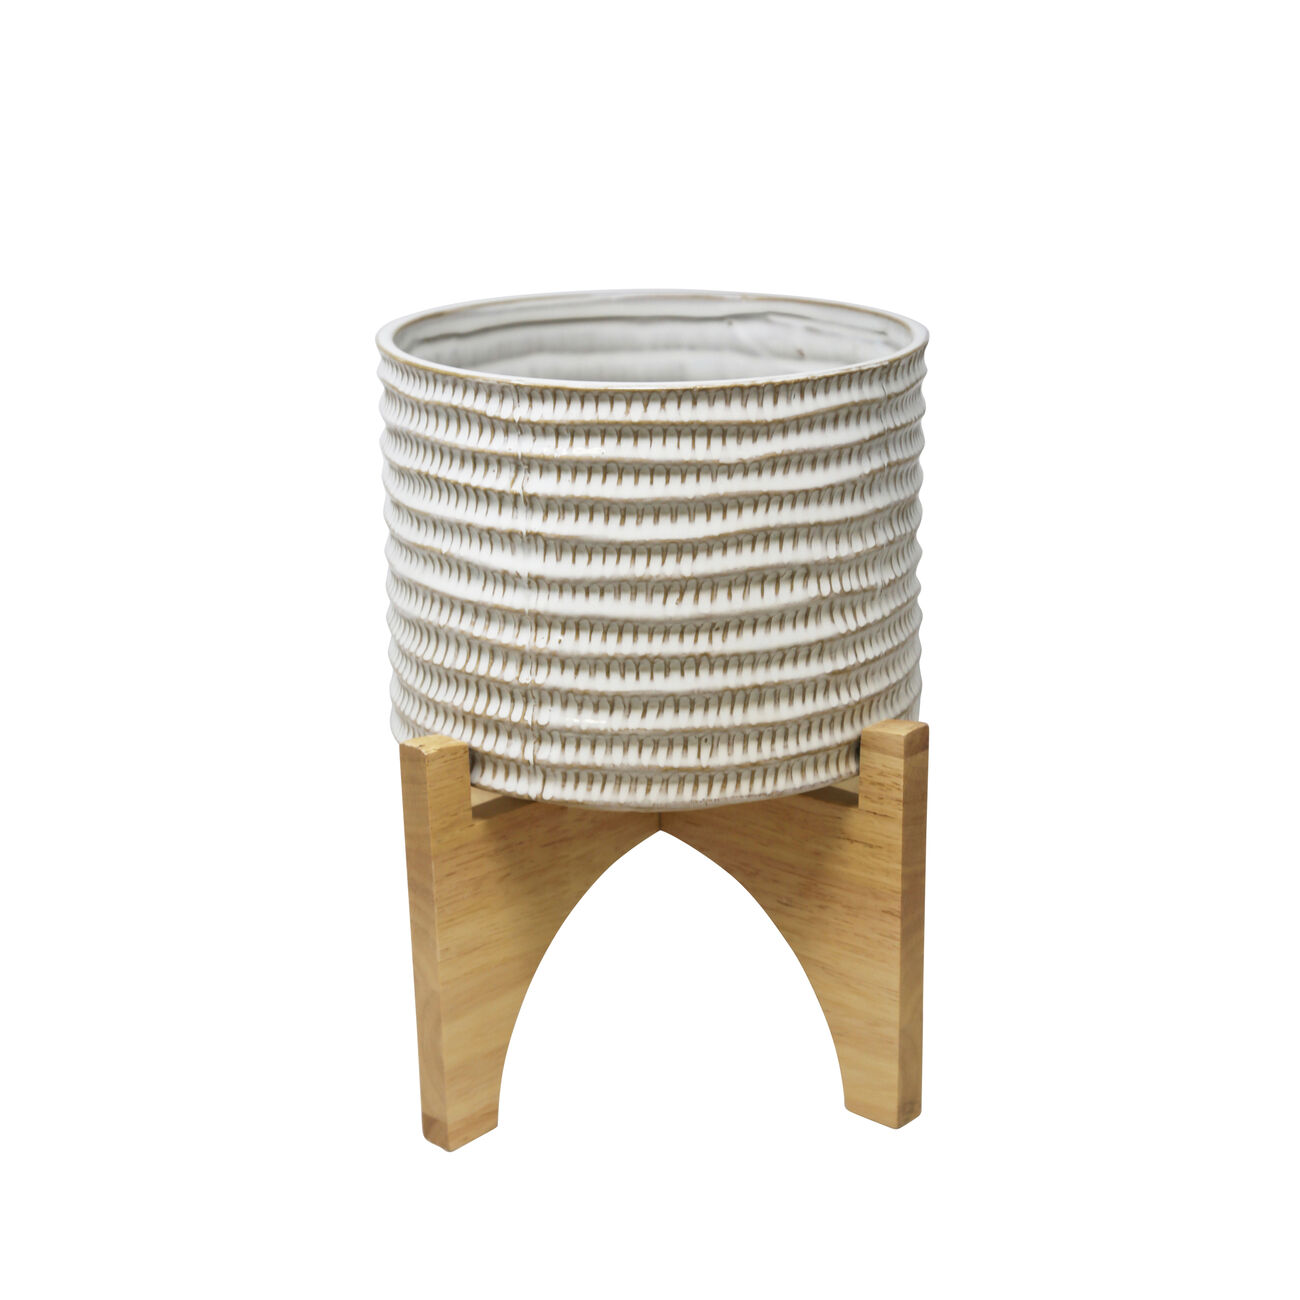 Ceramic Planter on Wooden Stand with Ribbed Design, White and Brown